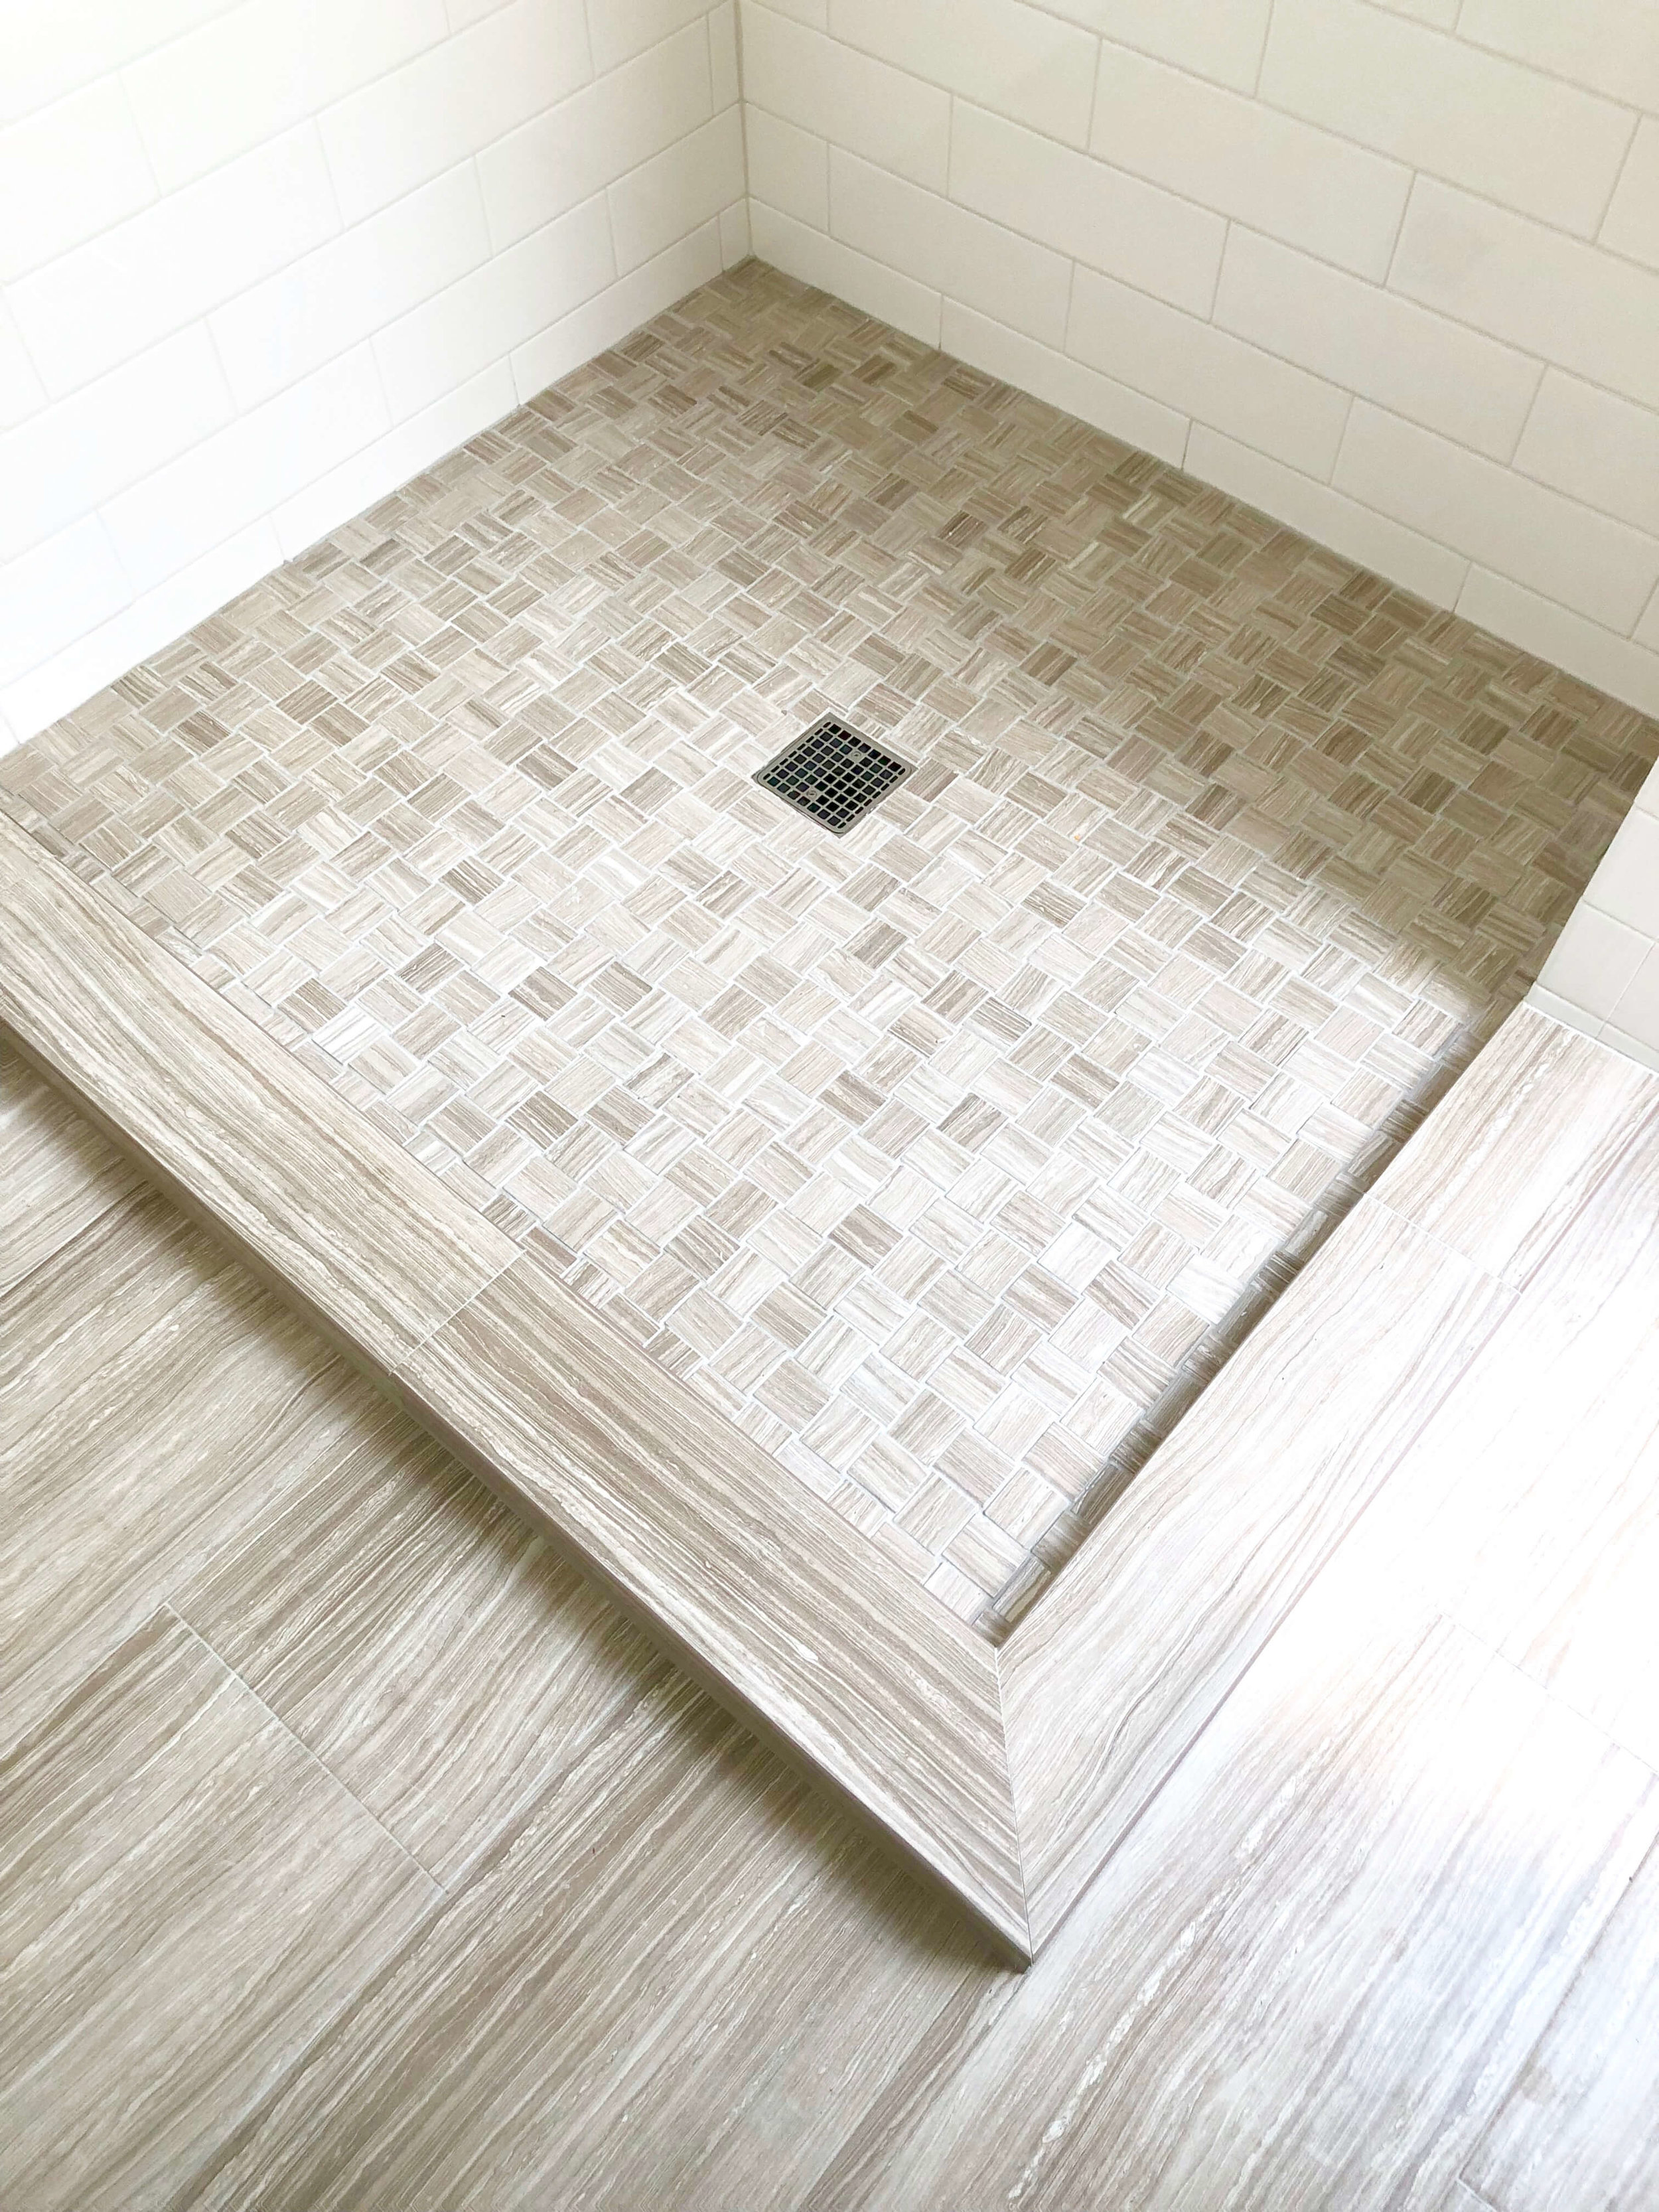 Small Bathroom Look Bigger, How To Tile Shower Curb Without Bullnose